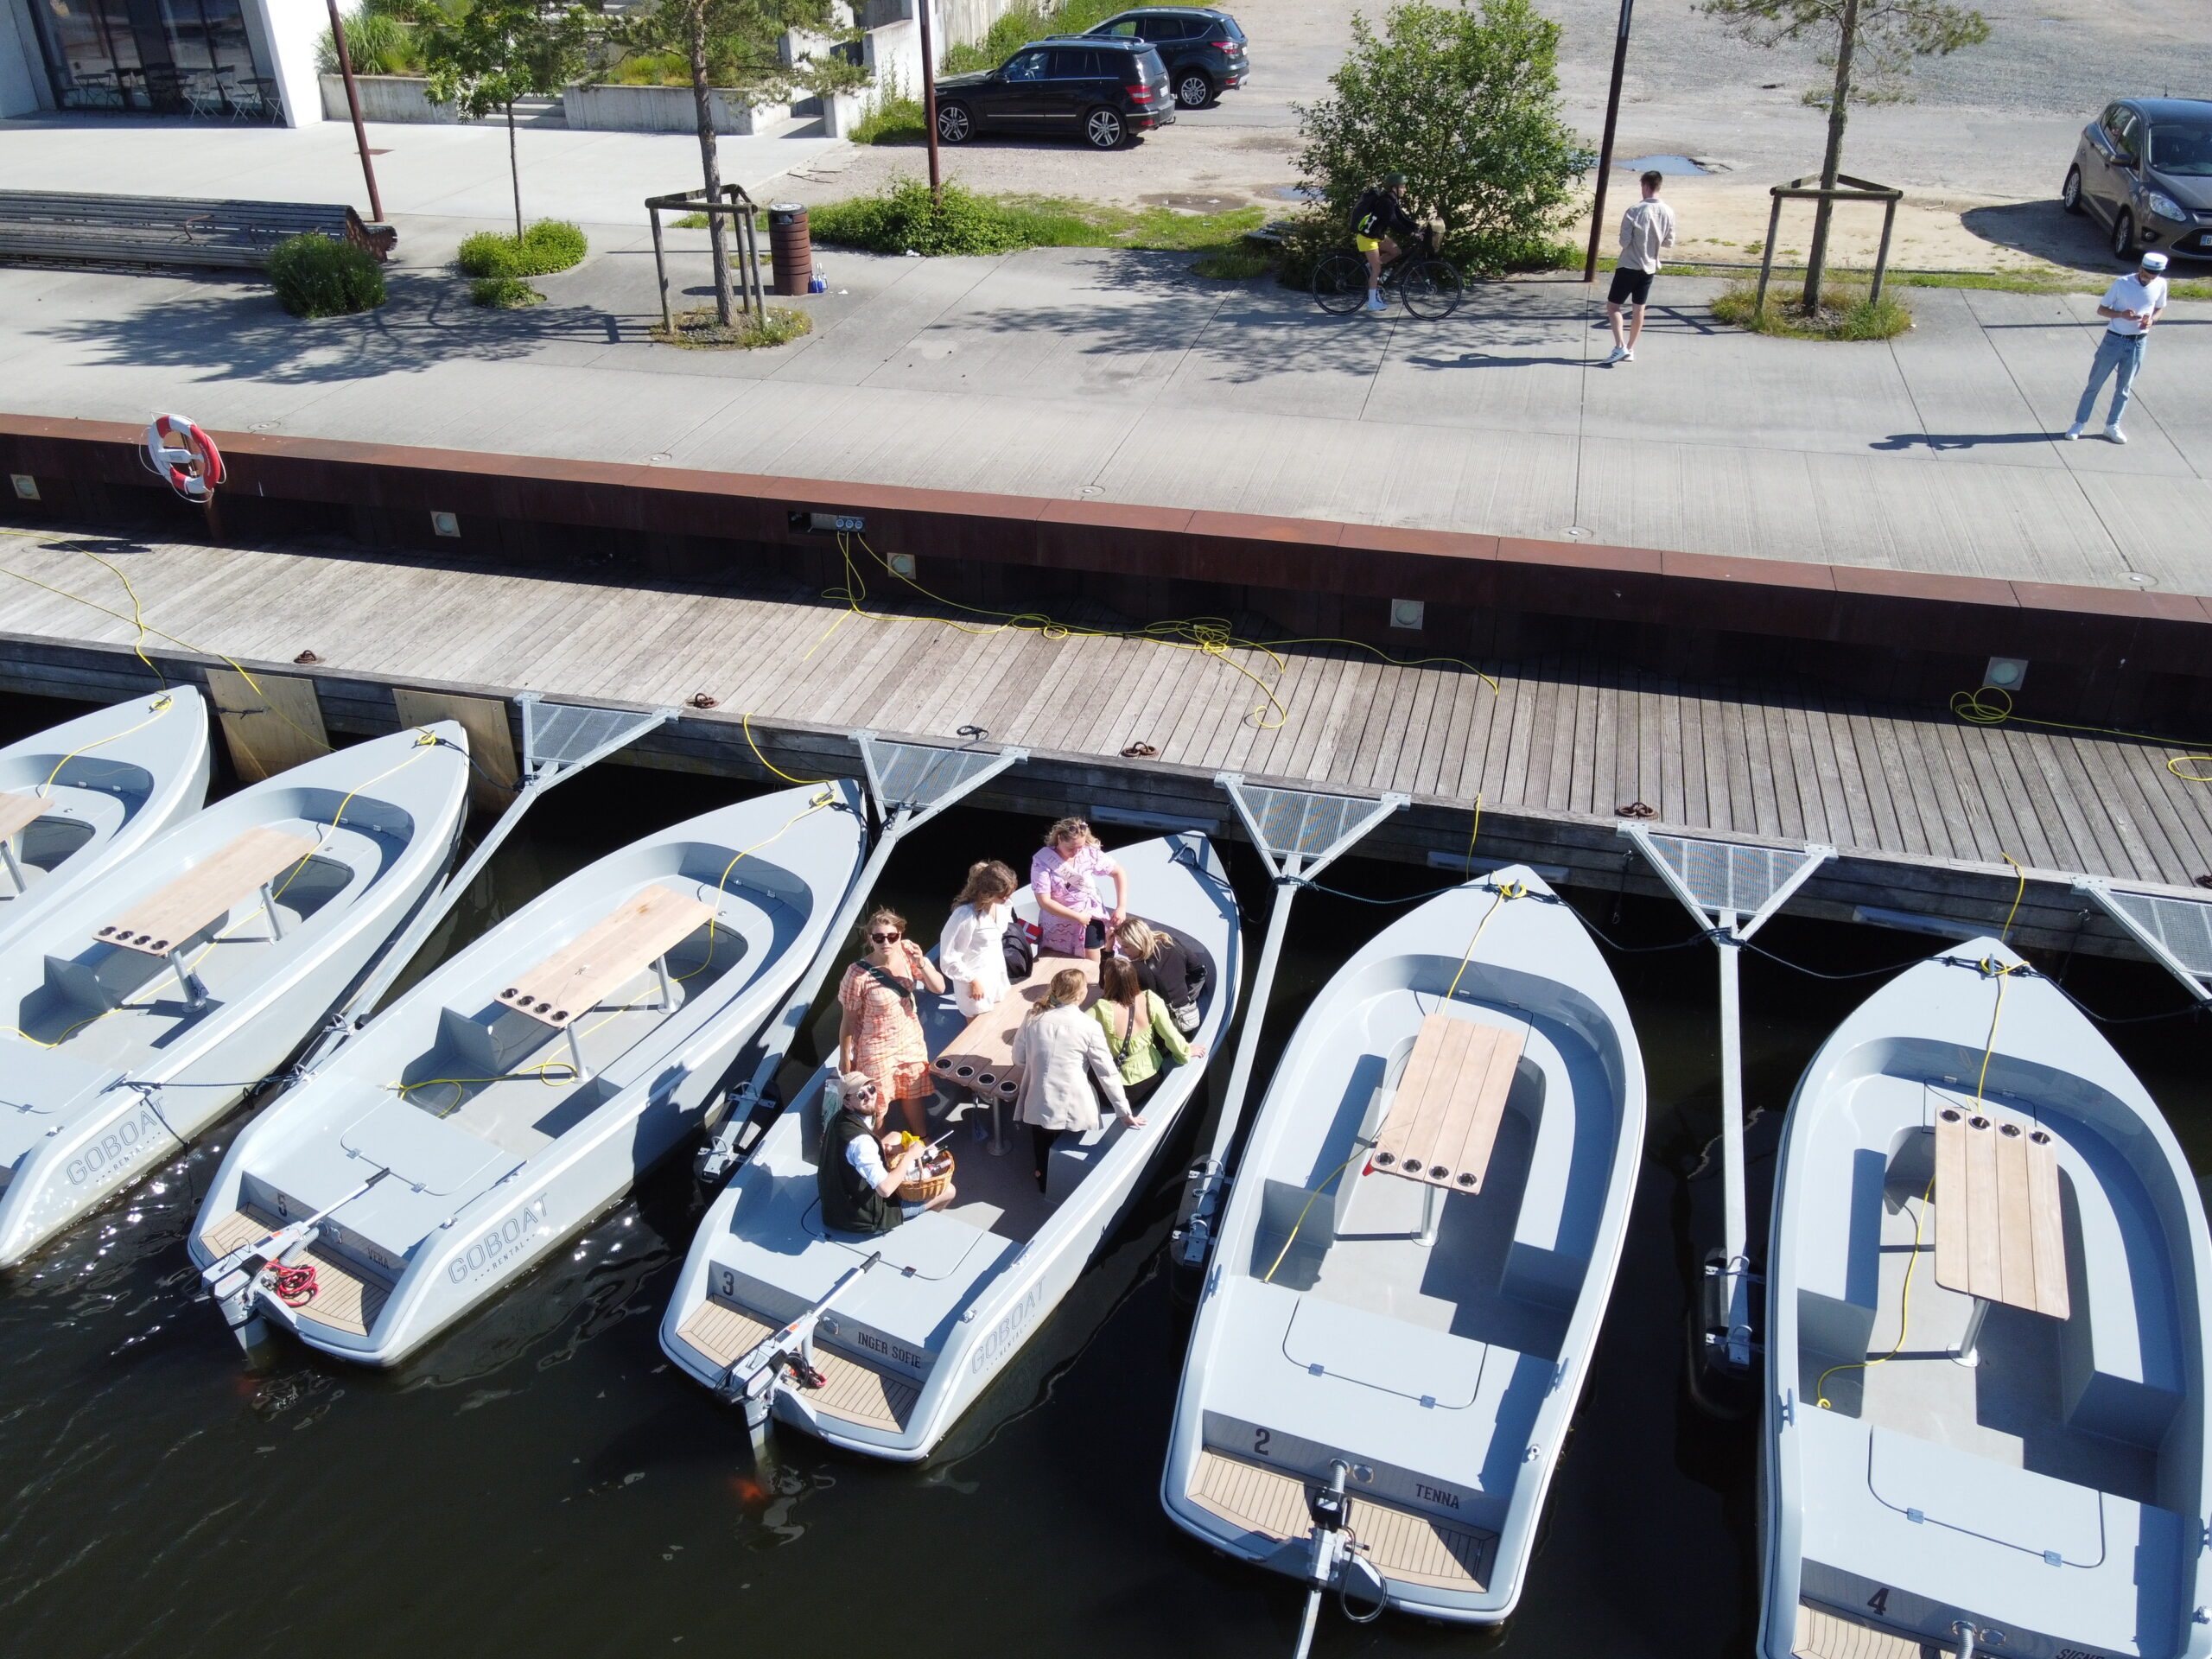 Rent a Boat in Aarhus without a license now - GoBoat Denmark